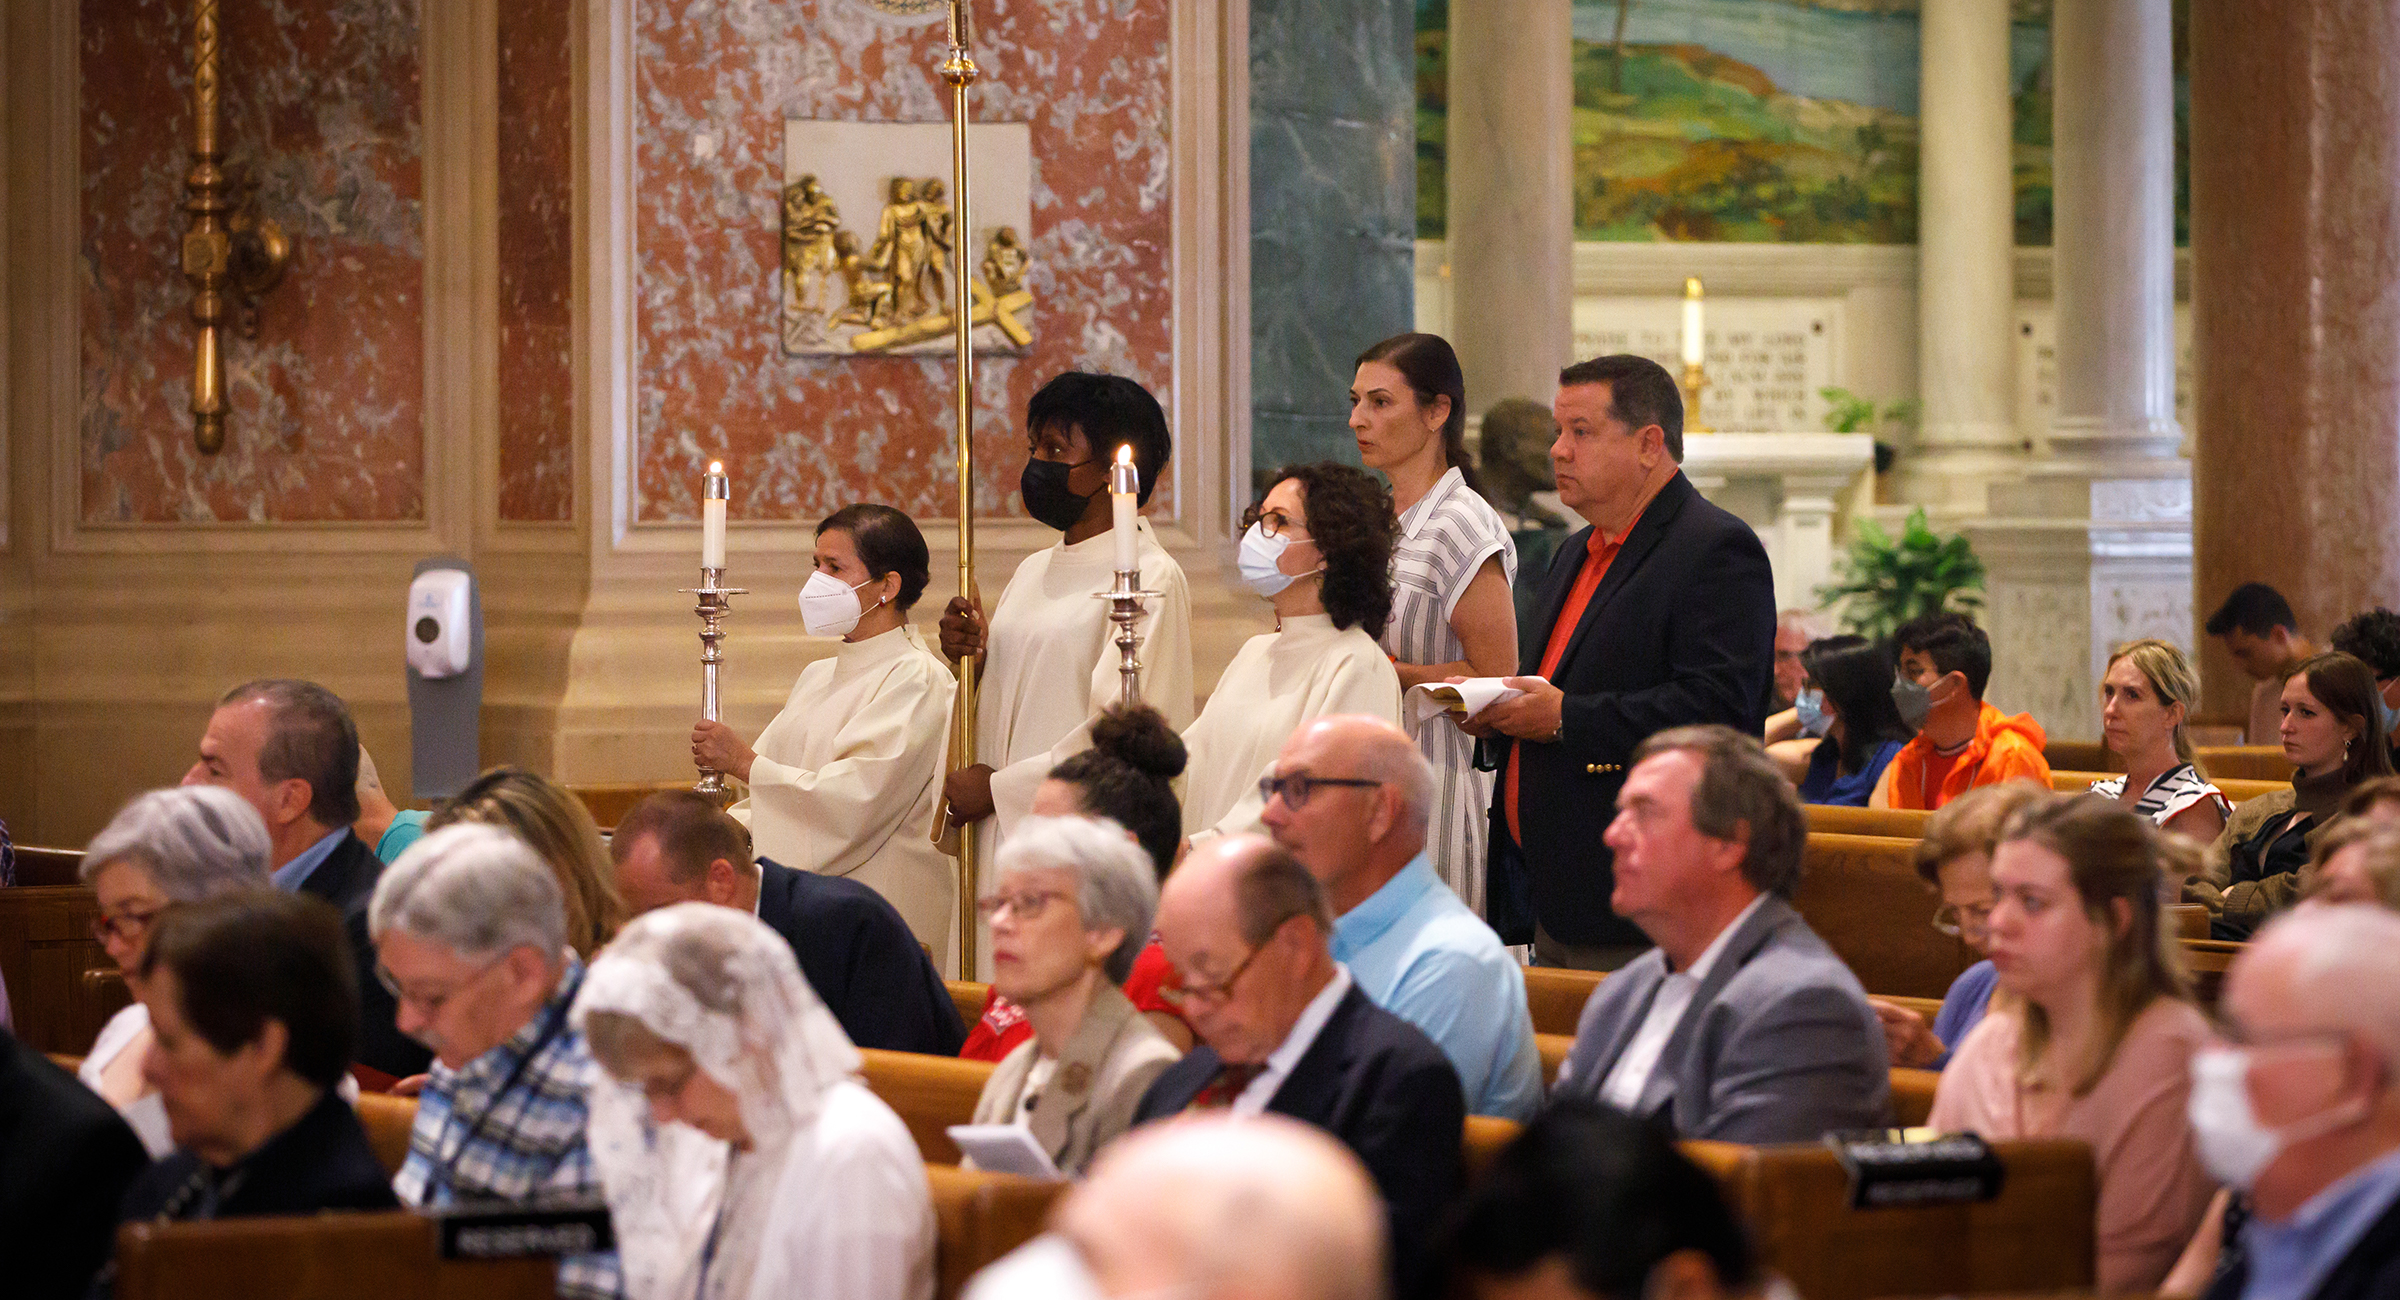 Celebrating Mass with the 1887 Society